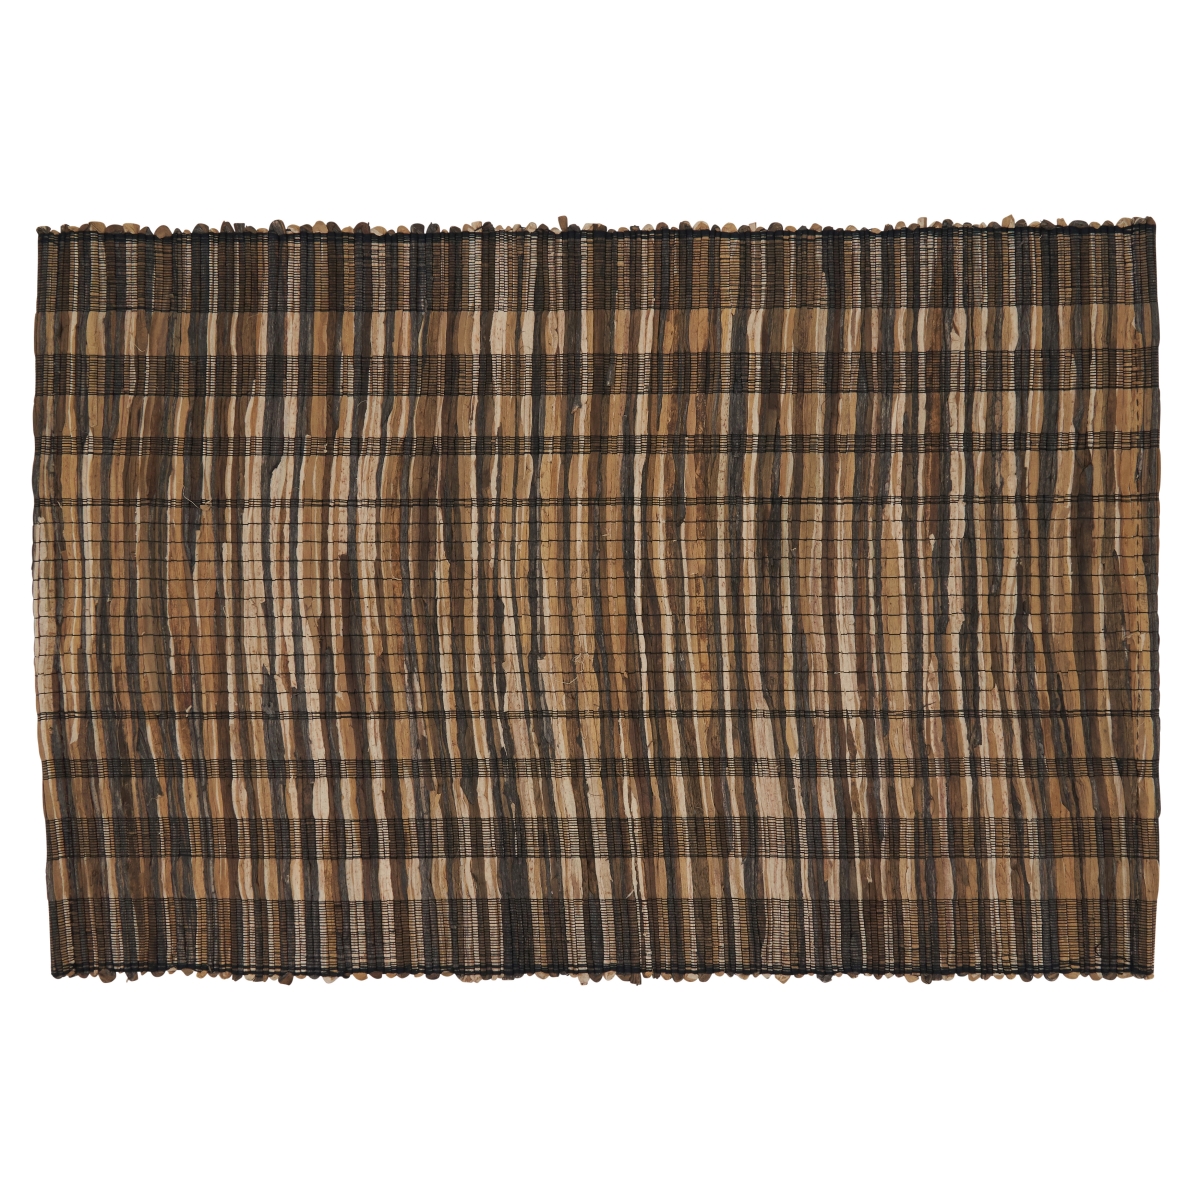 Cookhouse SARO  14 x 20 in. Oblong Water Hyacinth Placemats with Black Striped Design - Set of 4